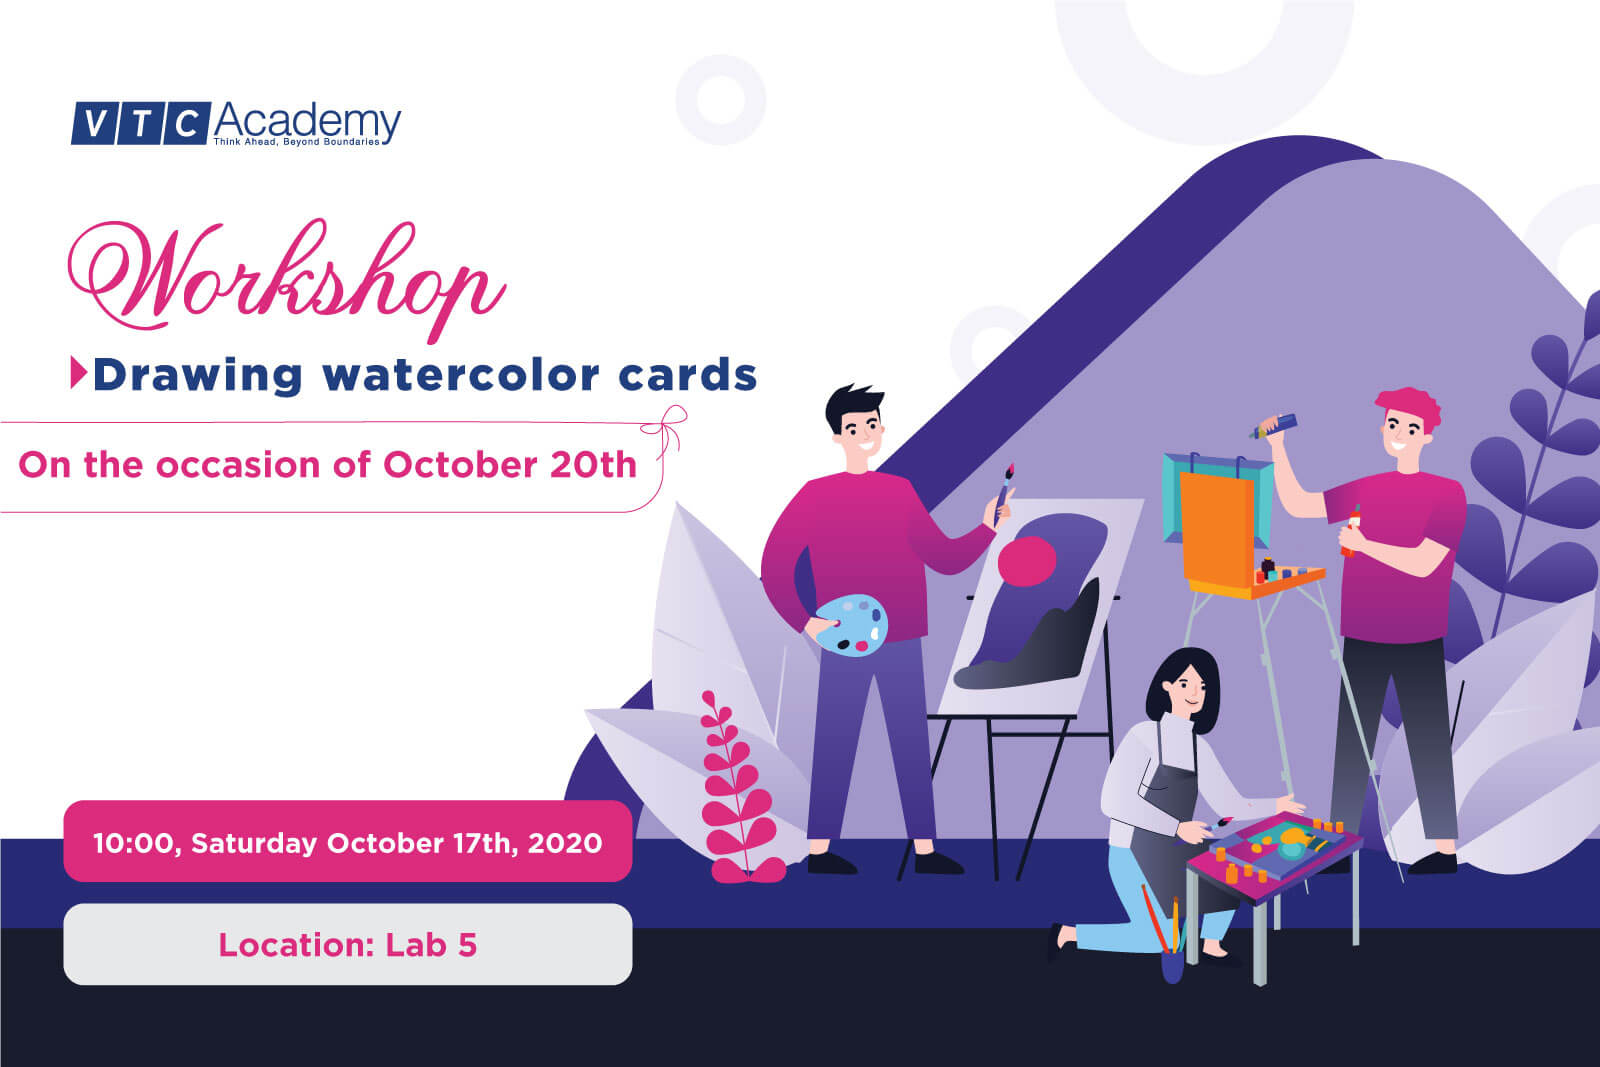 Workshop “Drawing watercolor cards” on the occasion of October 20th at VTC Academy HCMC